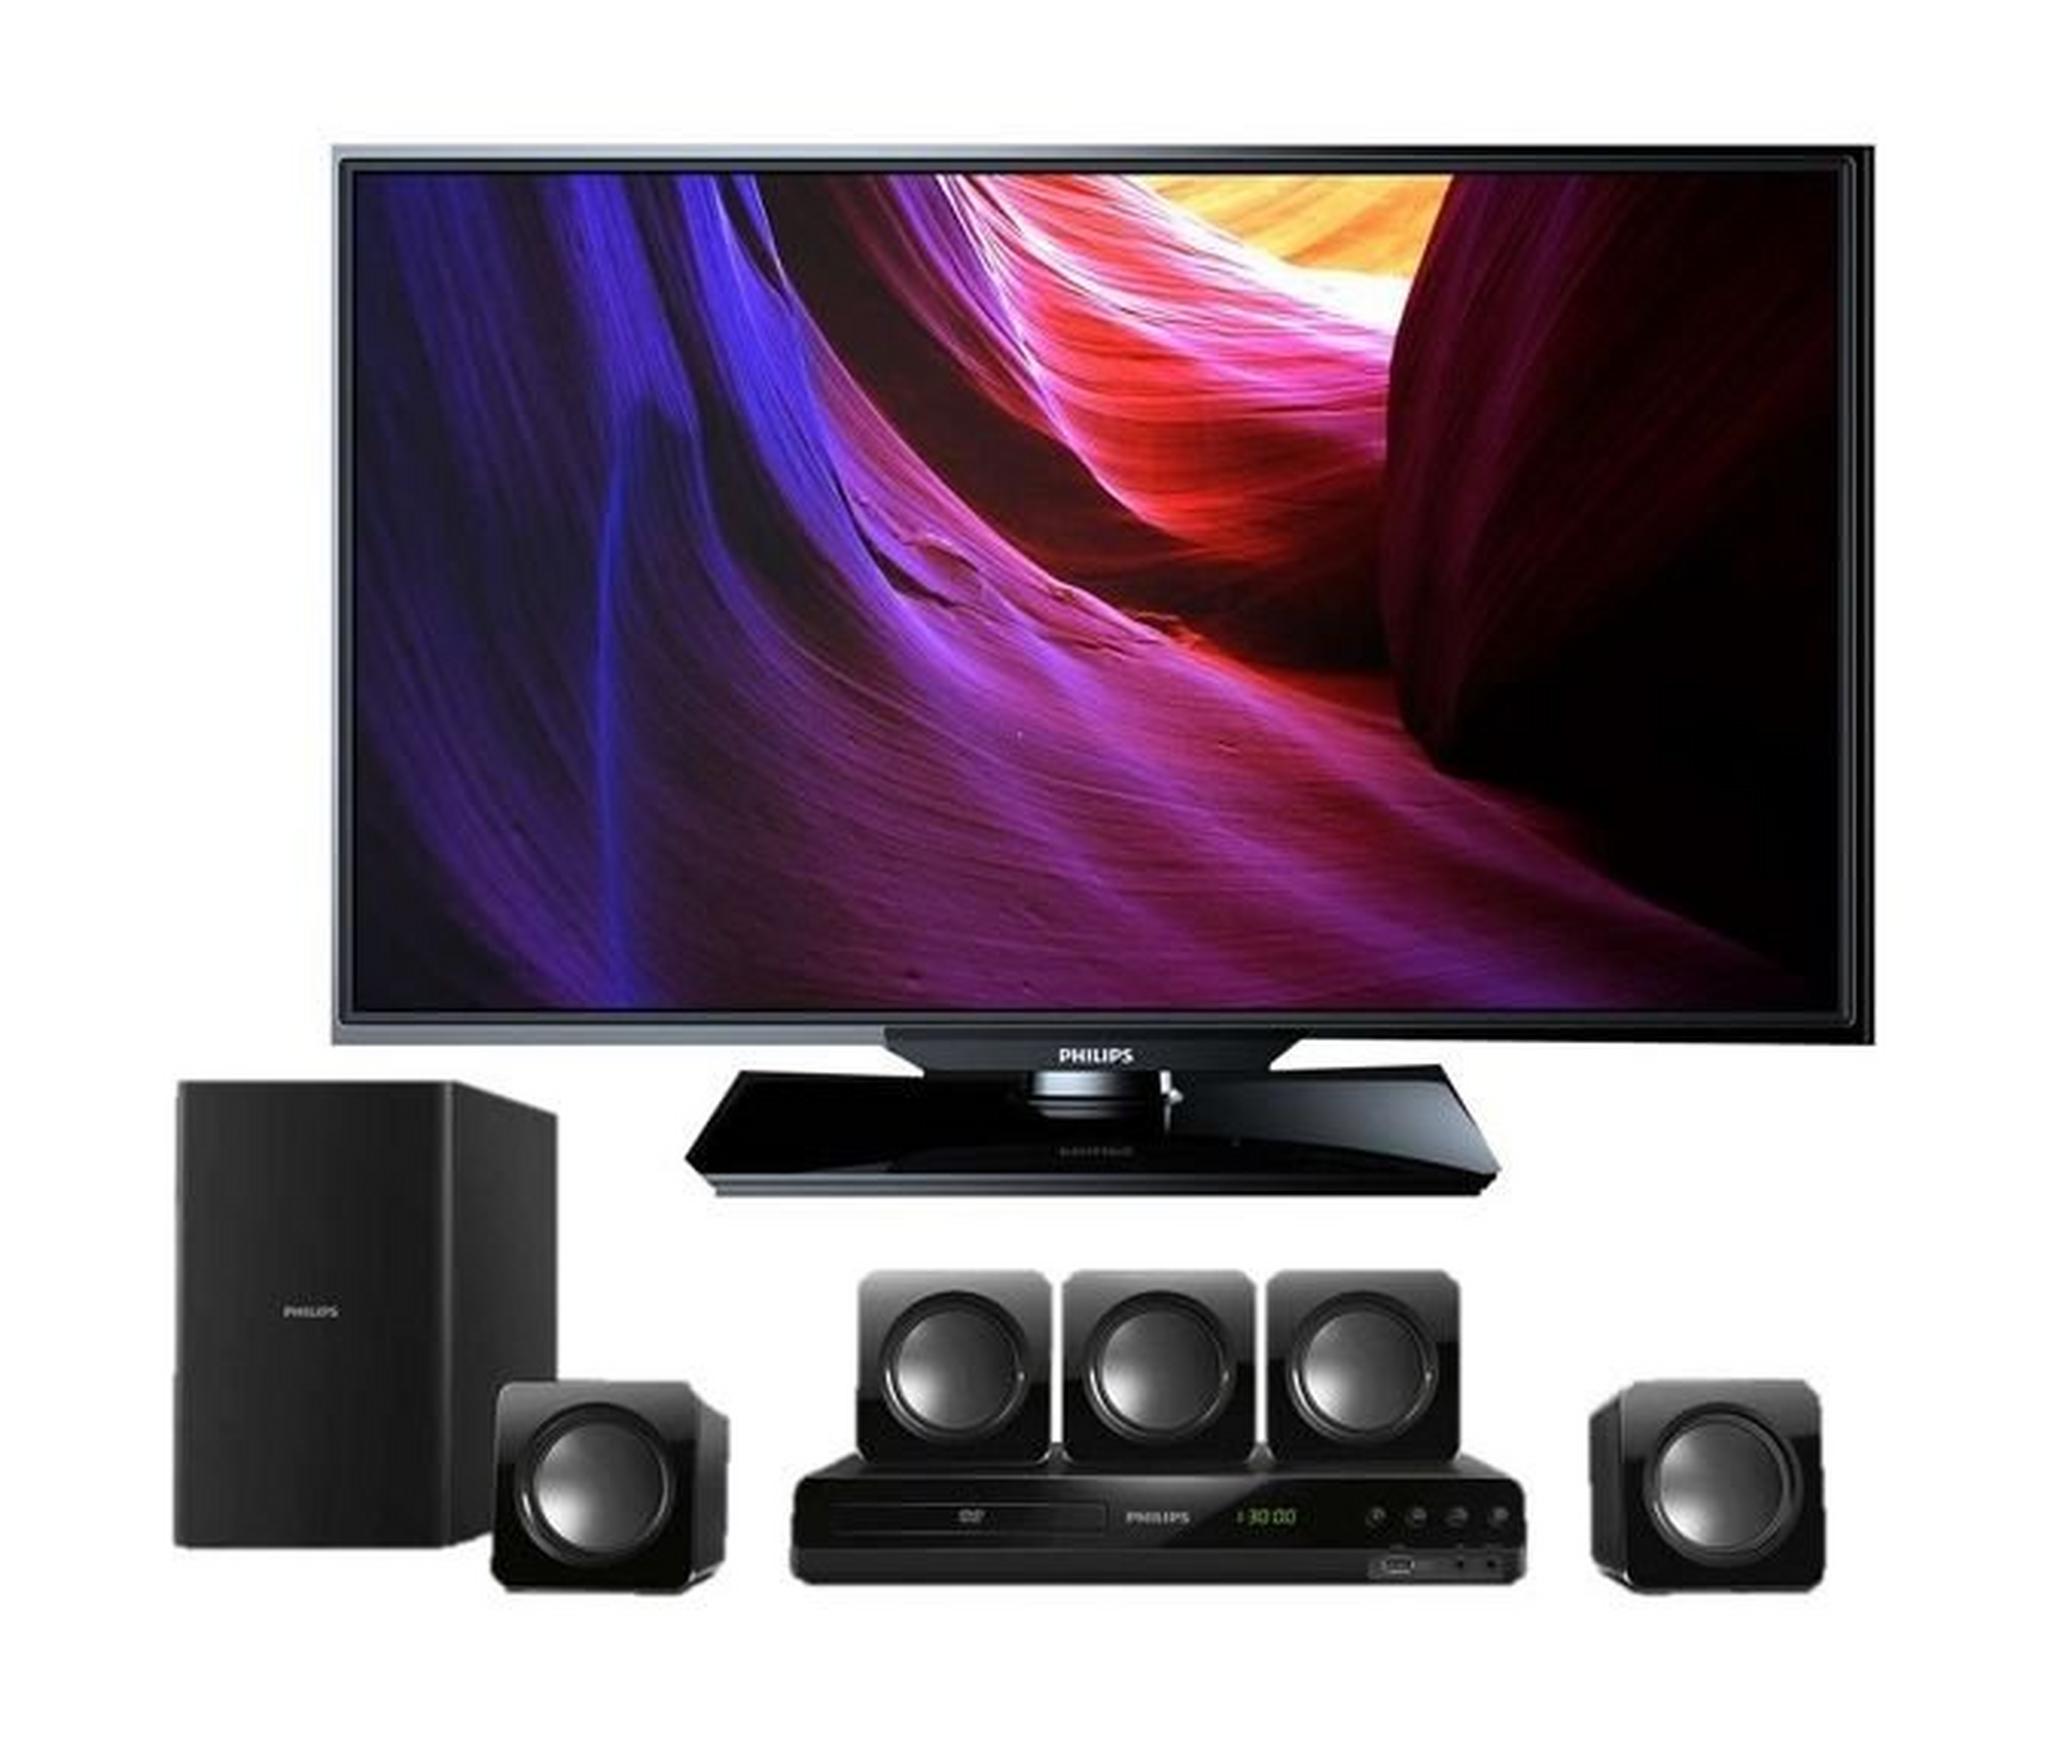 Philips 32-inch 4000 series Slim LED TV with Digital Crystal Clear + Philips HTD3509 5.1Ch DVD Home Theater System